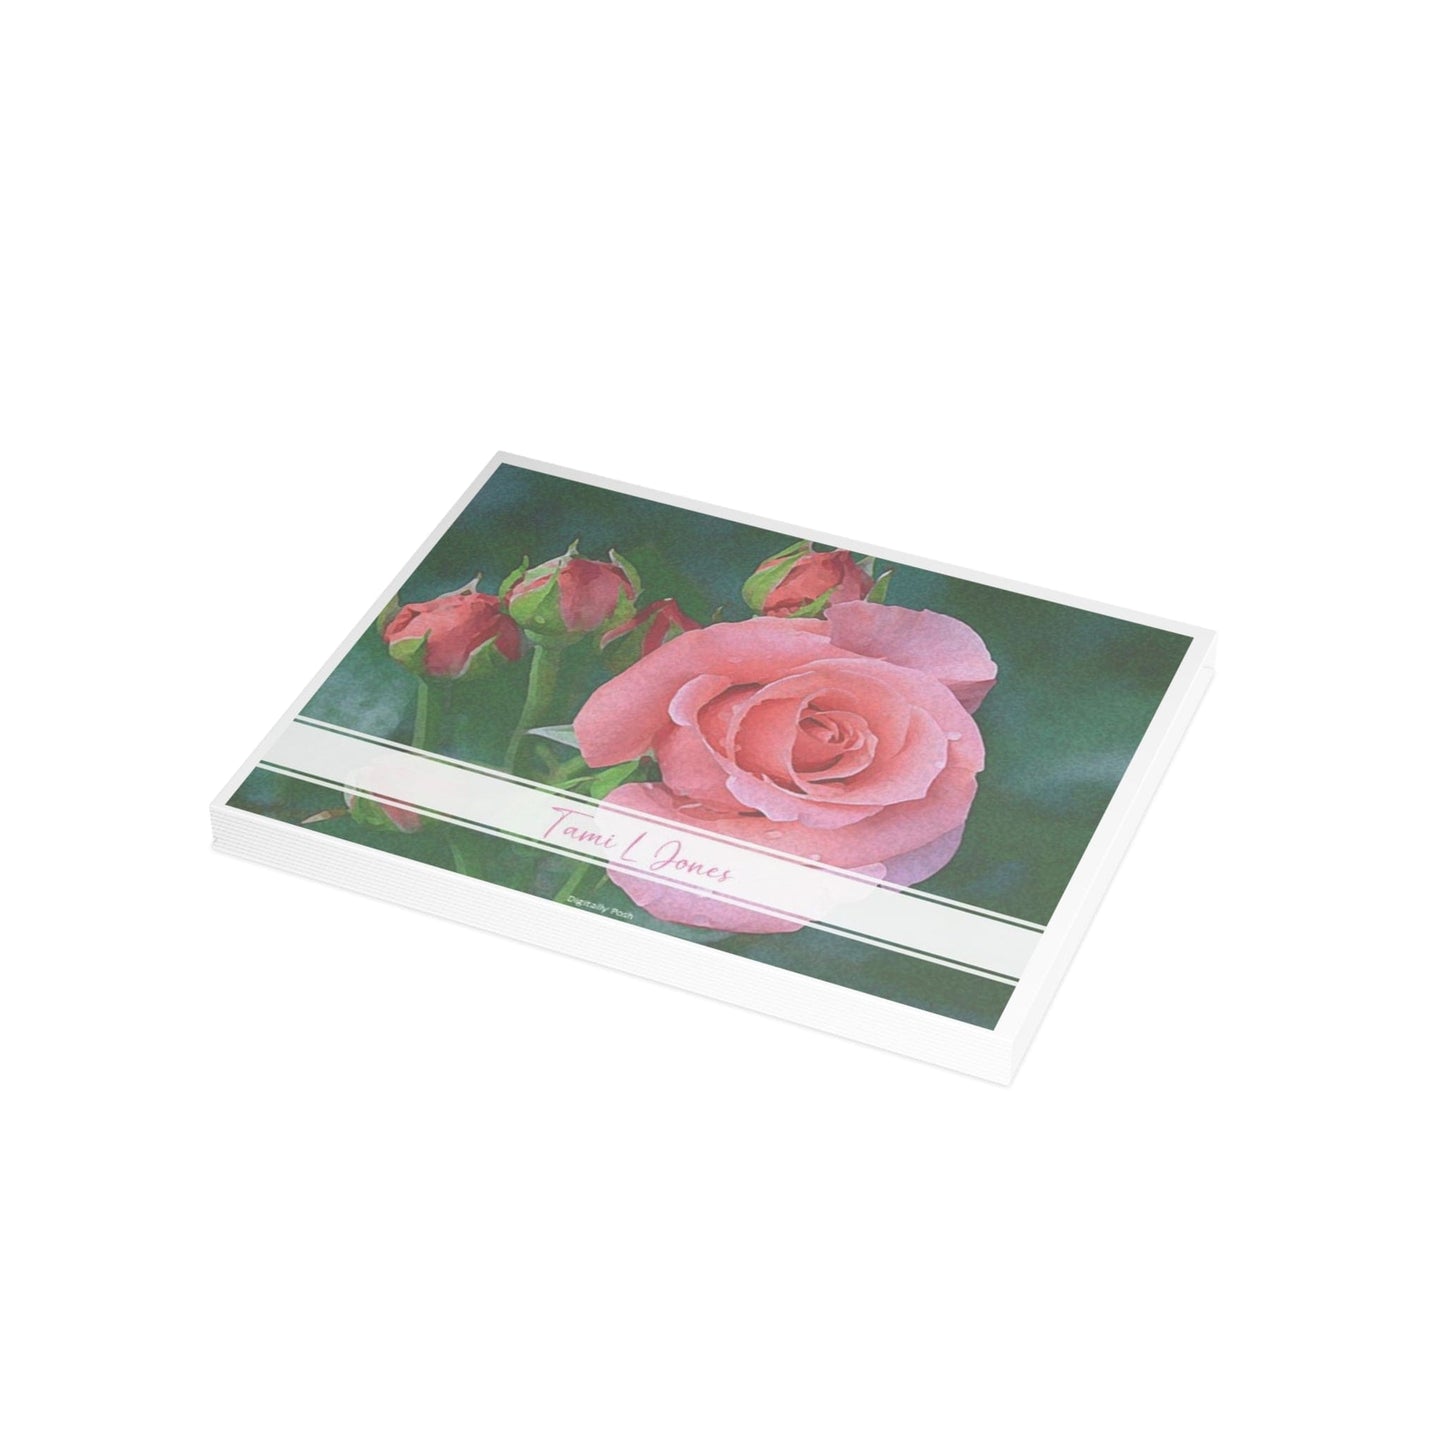 Personalized Note Card: Add a Personal Touch with Customized Stationery for Every Occasion. Pink Rose Notecard Bundles (envelopes included)